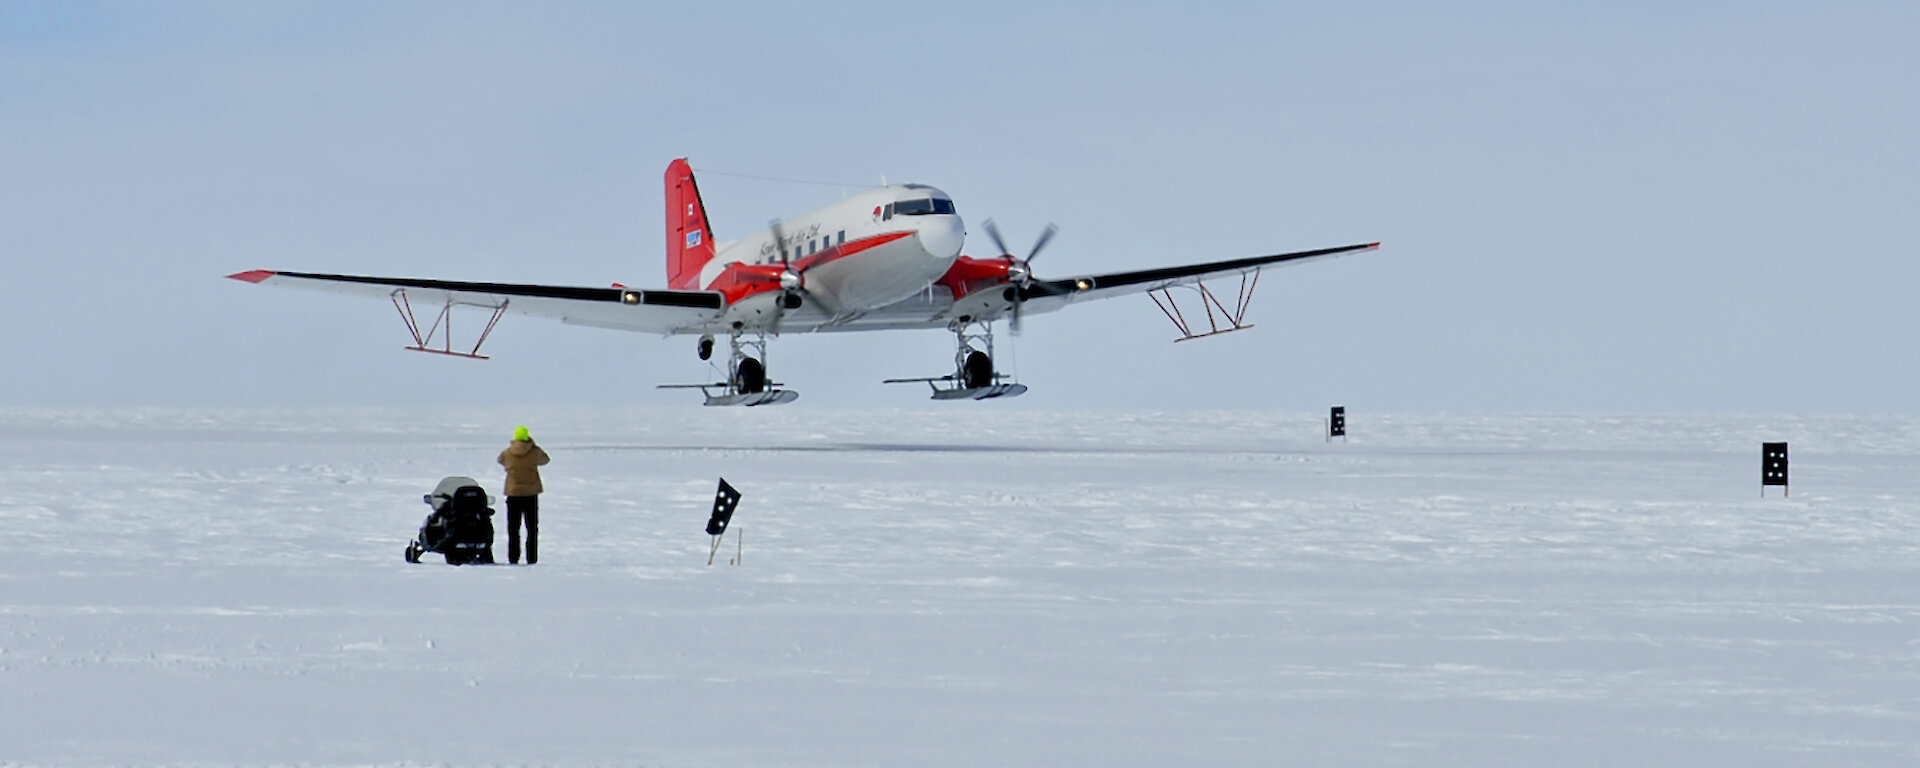 The 72 year old Basler BT-67 aircraft with its wing-mounted, ice penetrating radar antennae